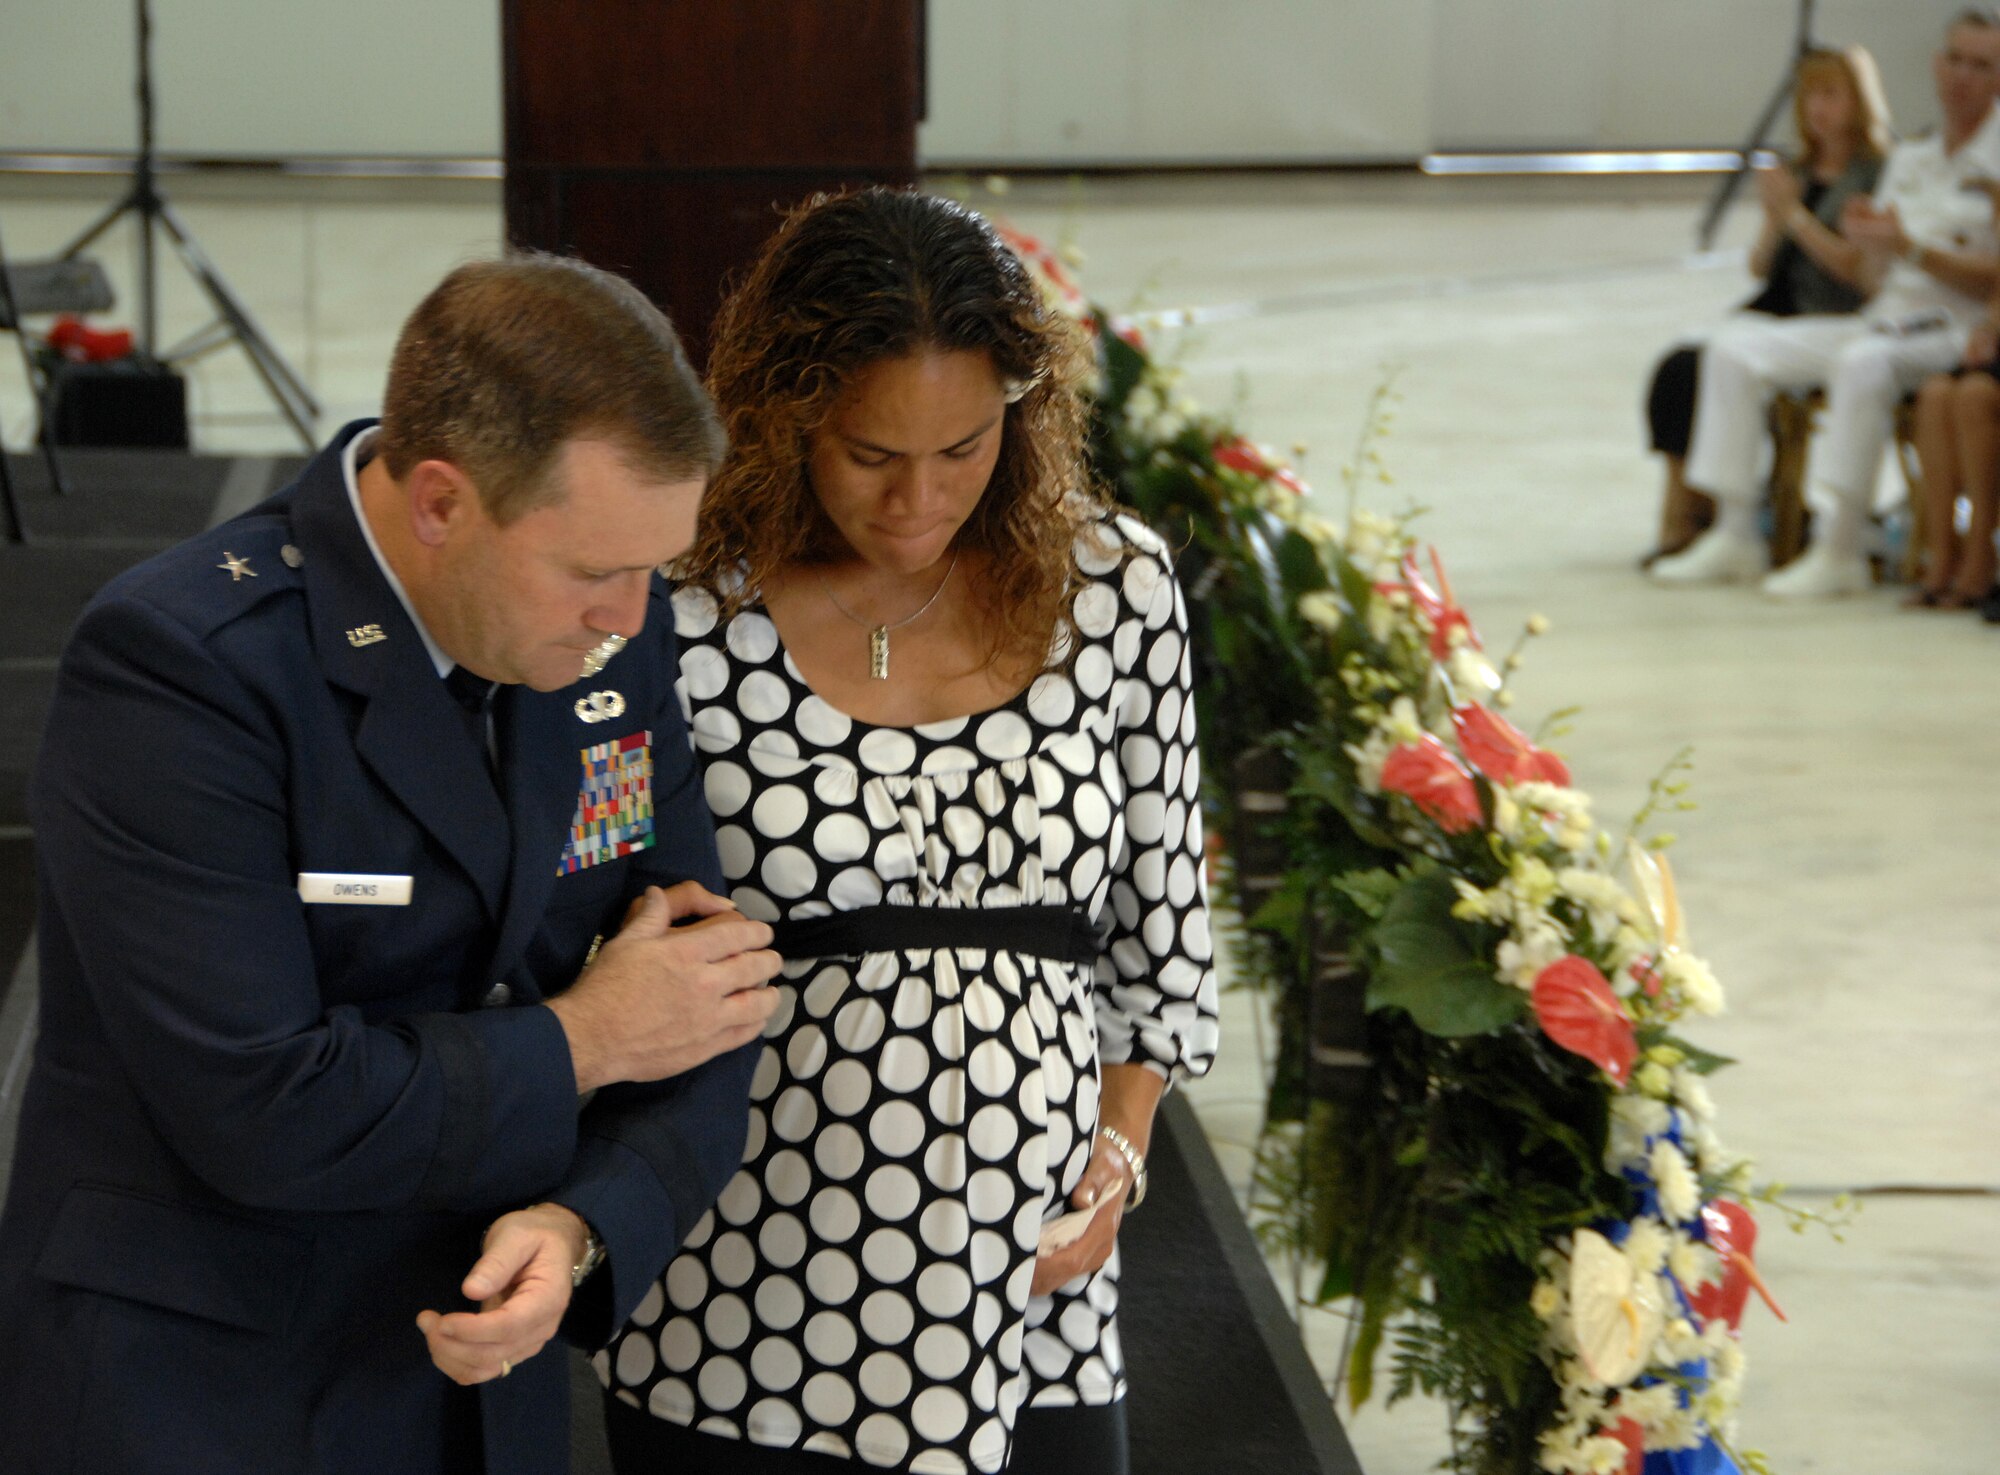 ANDERSEN AIR FORCE BASE, Guam - Brig. Gen. Doug Owens, 36th Wing commander, assists Ursula Martin, wife of Col. George Martin, 36th Medical Group deputy commander, during a memorial ceremony Friday at Hangar One here. Colonel Martin and five other Airmen lost their lives when their B-52H Stratofortress “Raider 21” crashed 25 miles off the coast of Guam.  (U.S. Air Force photo by Airman 1st Class Courtney Witt) 
